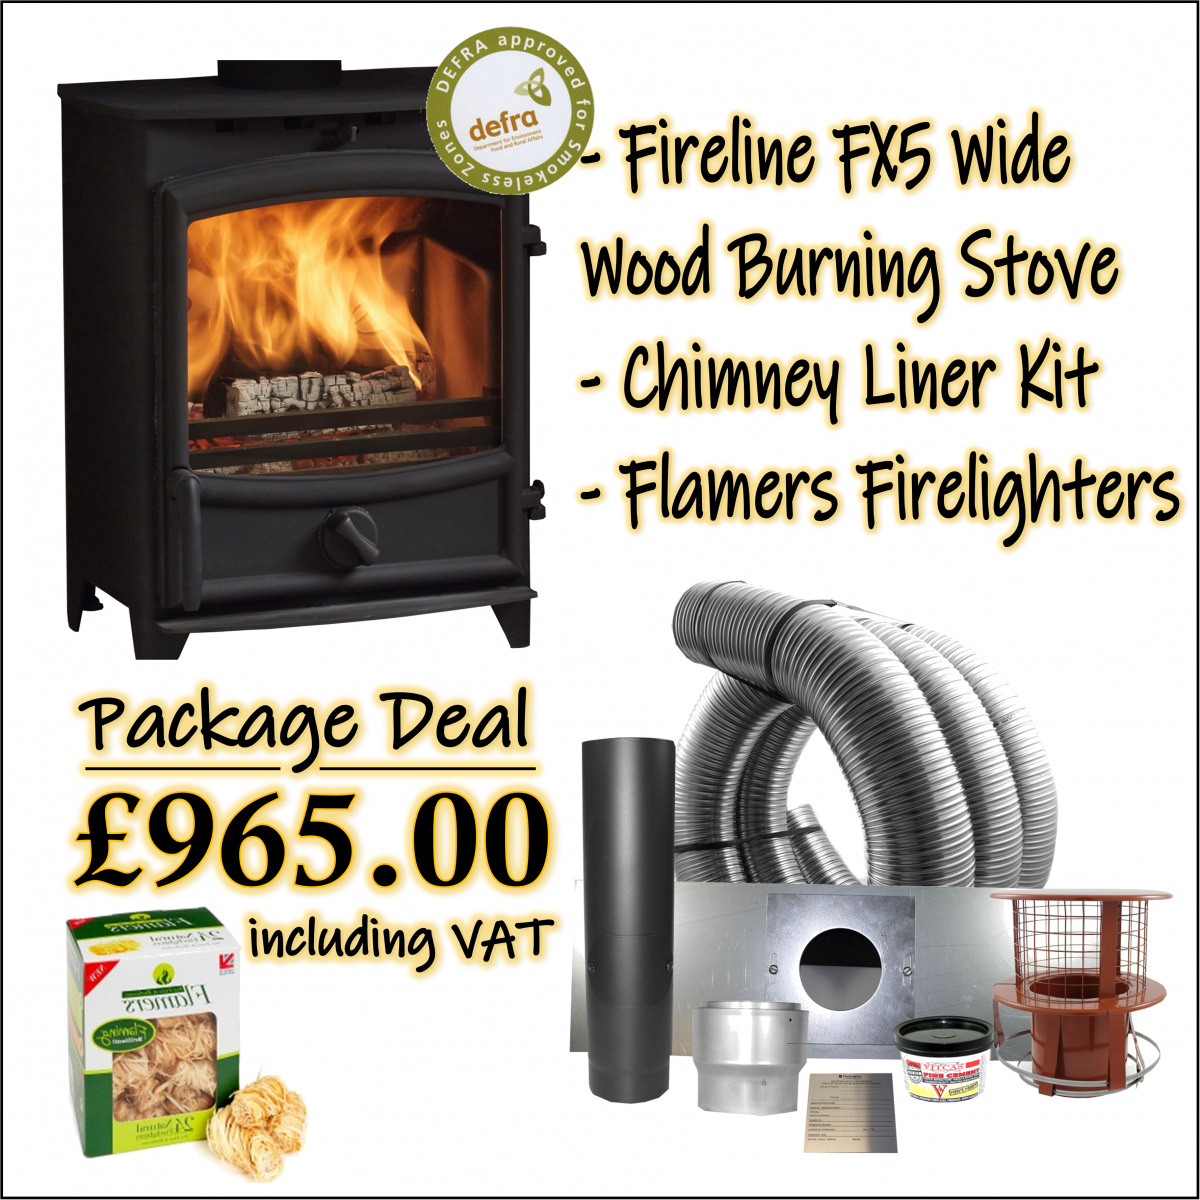 Fireline FX5 Wide Stove Package Deal